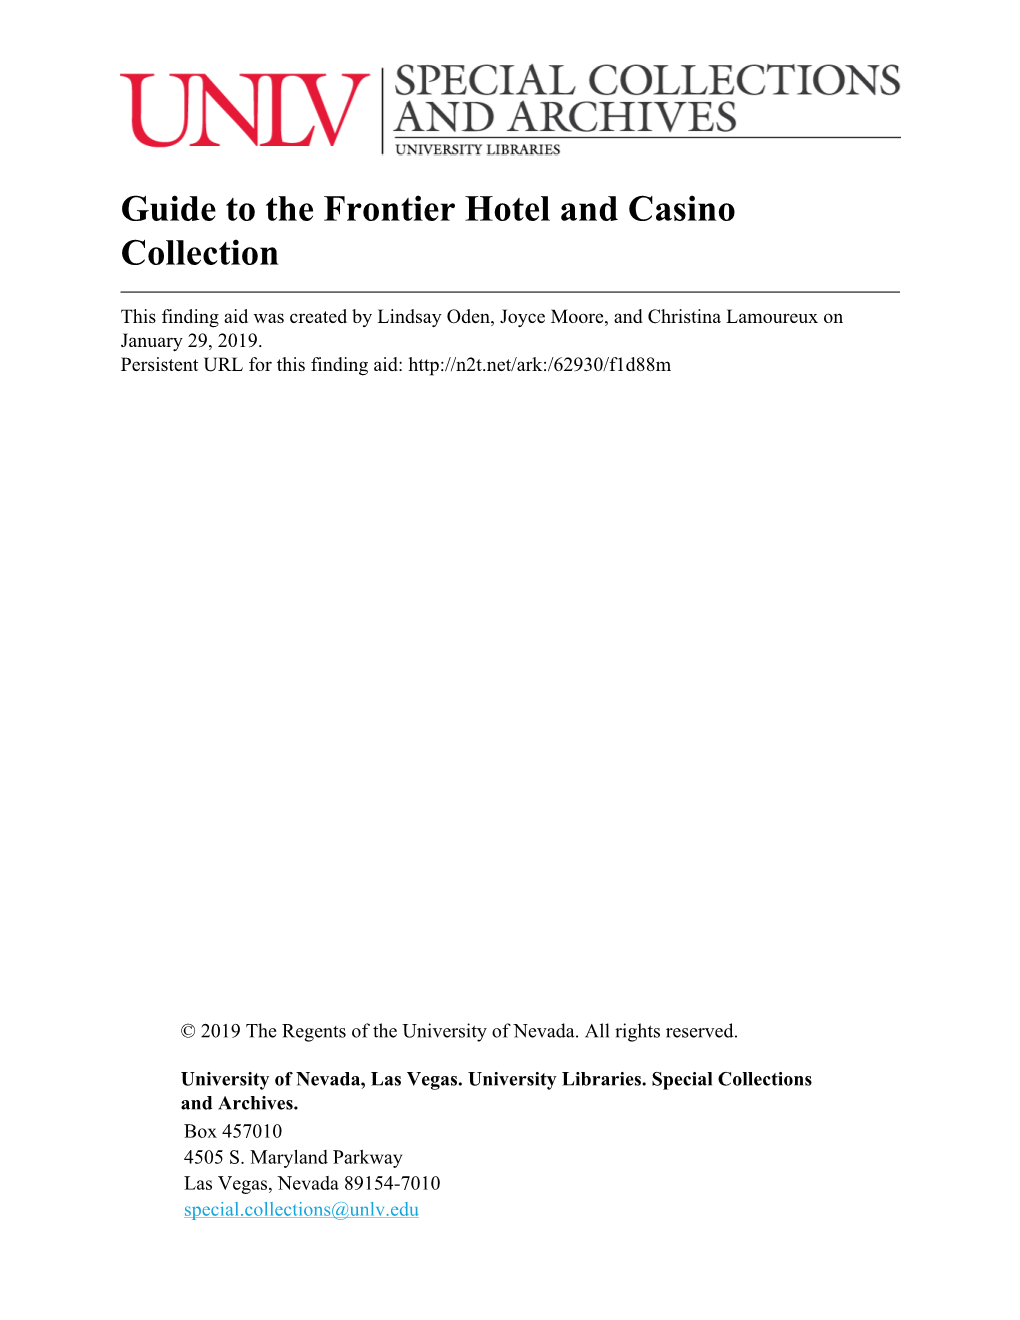 Guide to the Frontier Hotel and Casino Collection